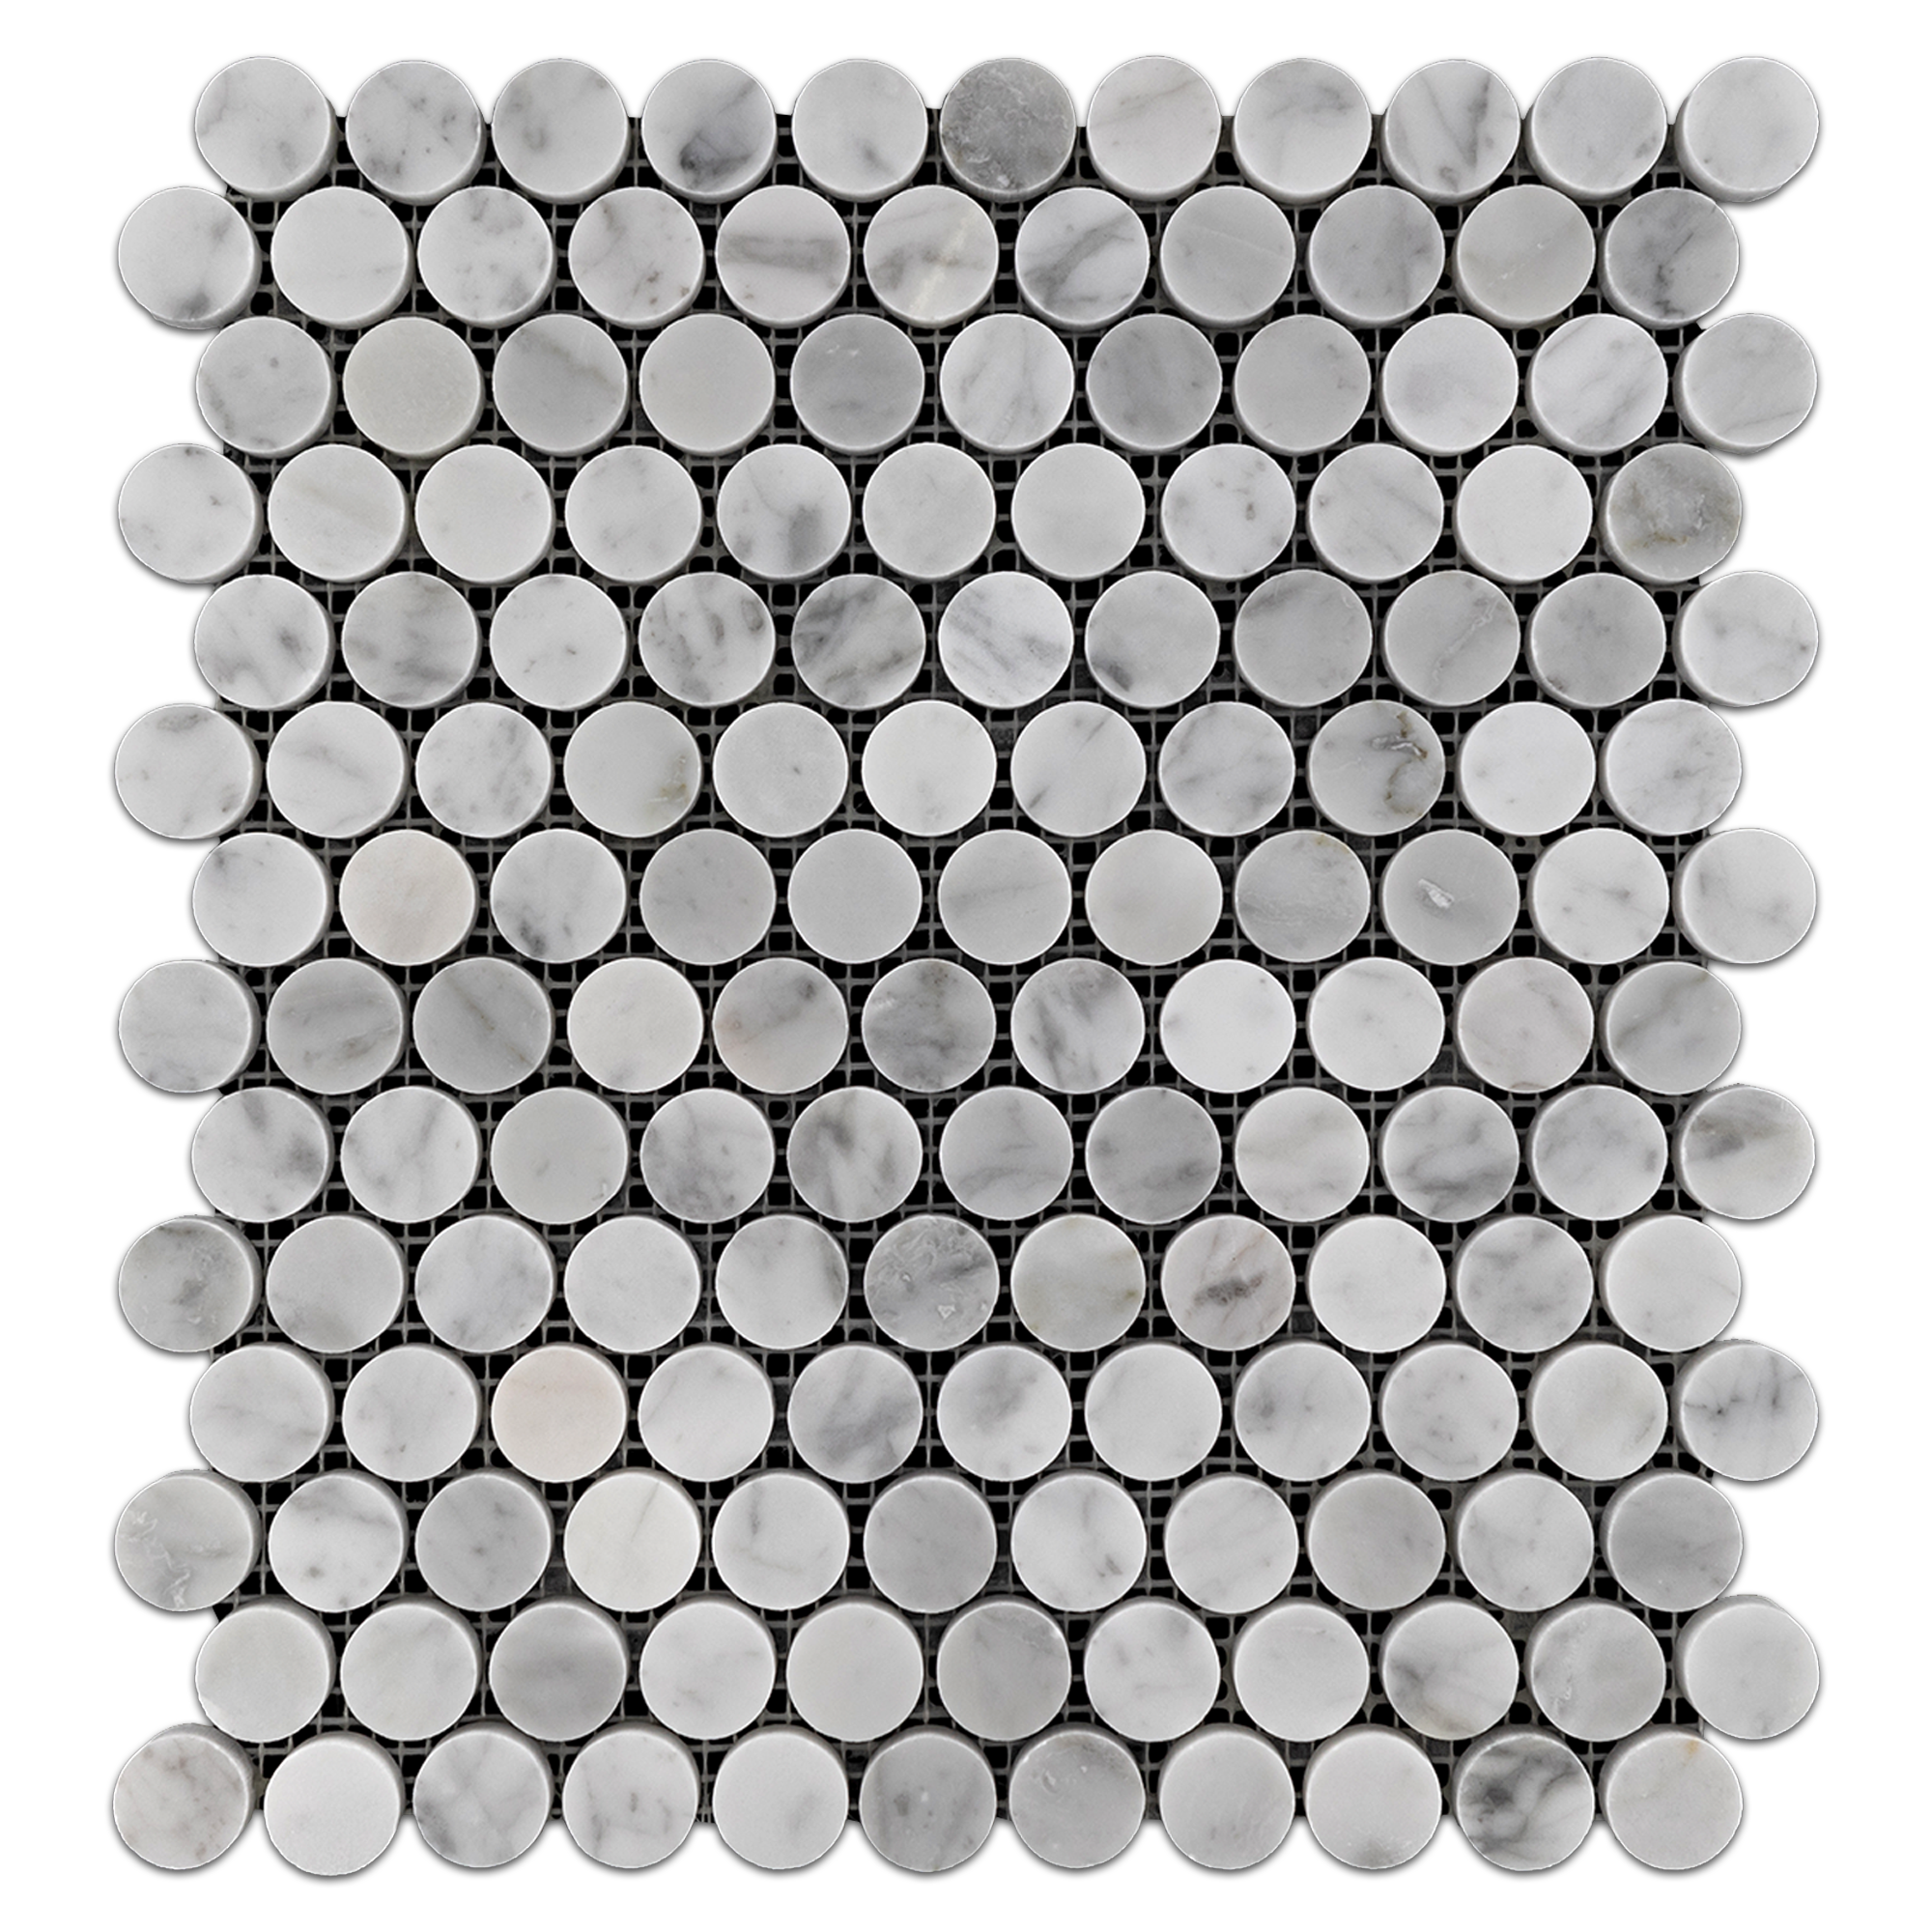 Alt text: "Elon Bianco Carrara marble 1-inch penny round field mosaic tile, 11.5625x12.875 inches, polished finish, by Surface Group International."